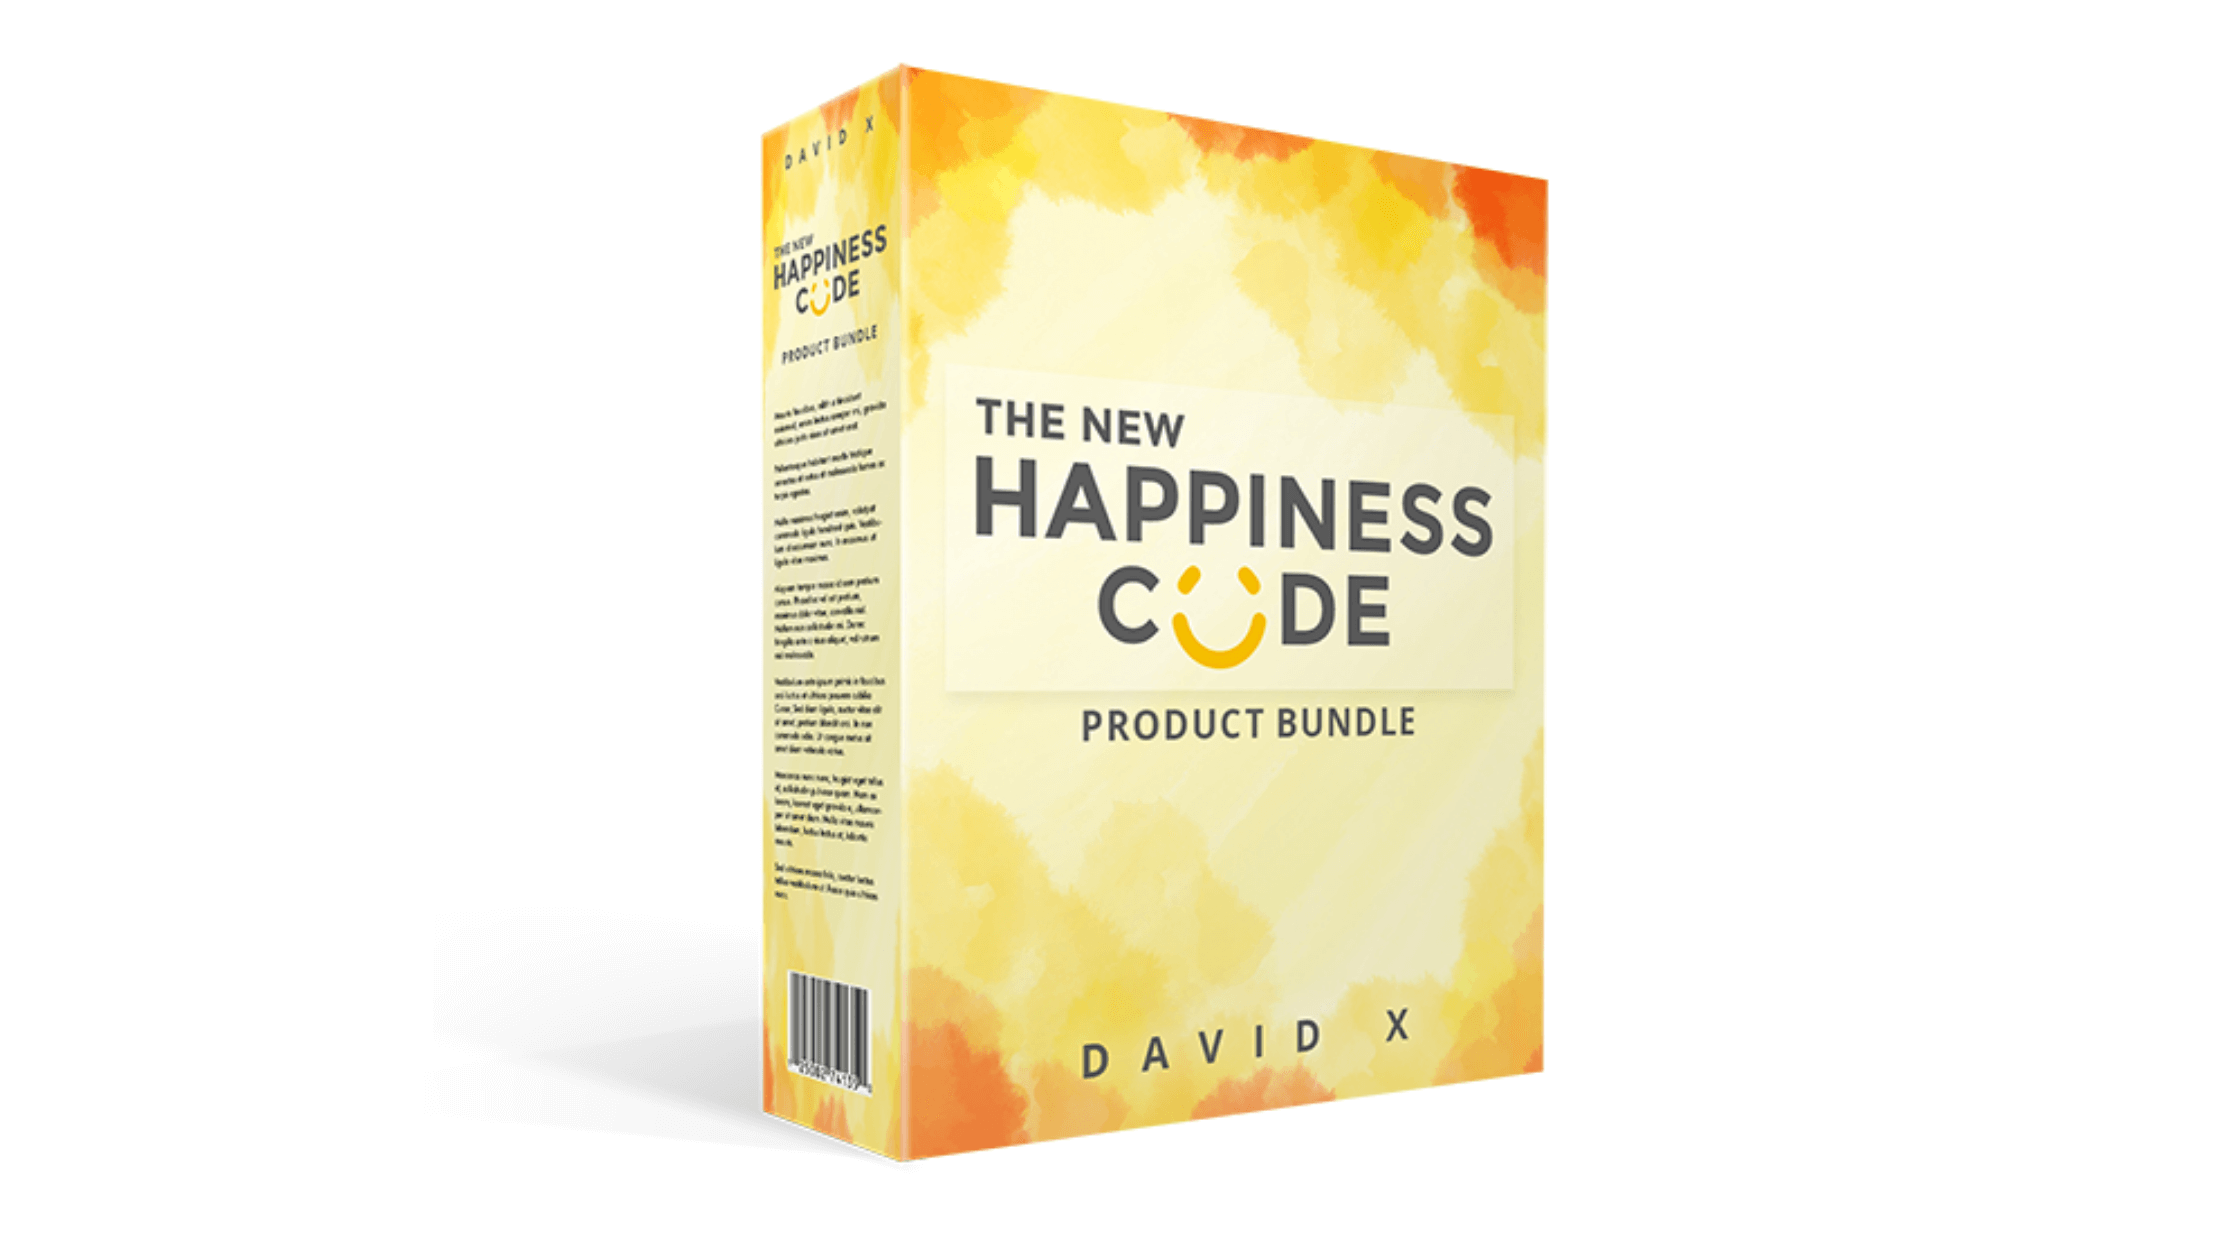 The New Happiness Code Reviews